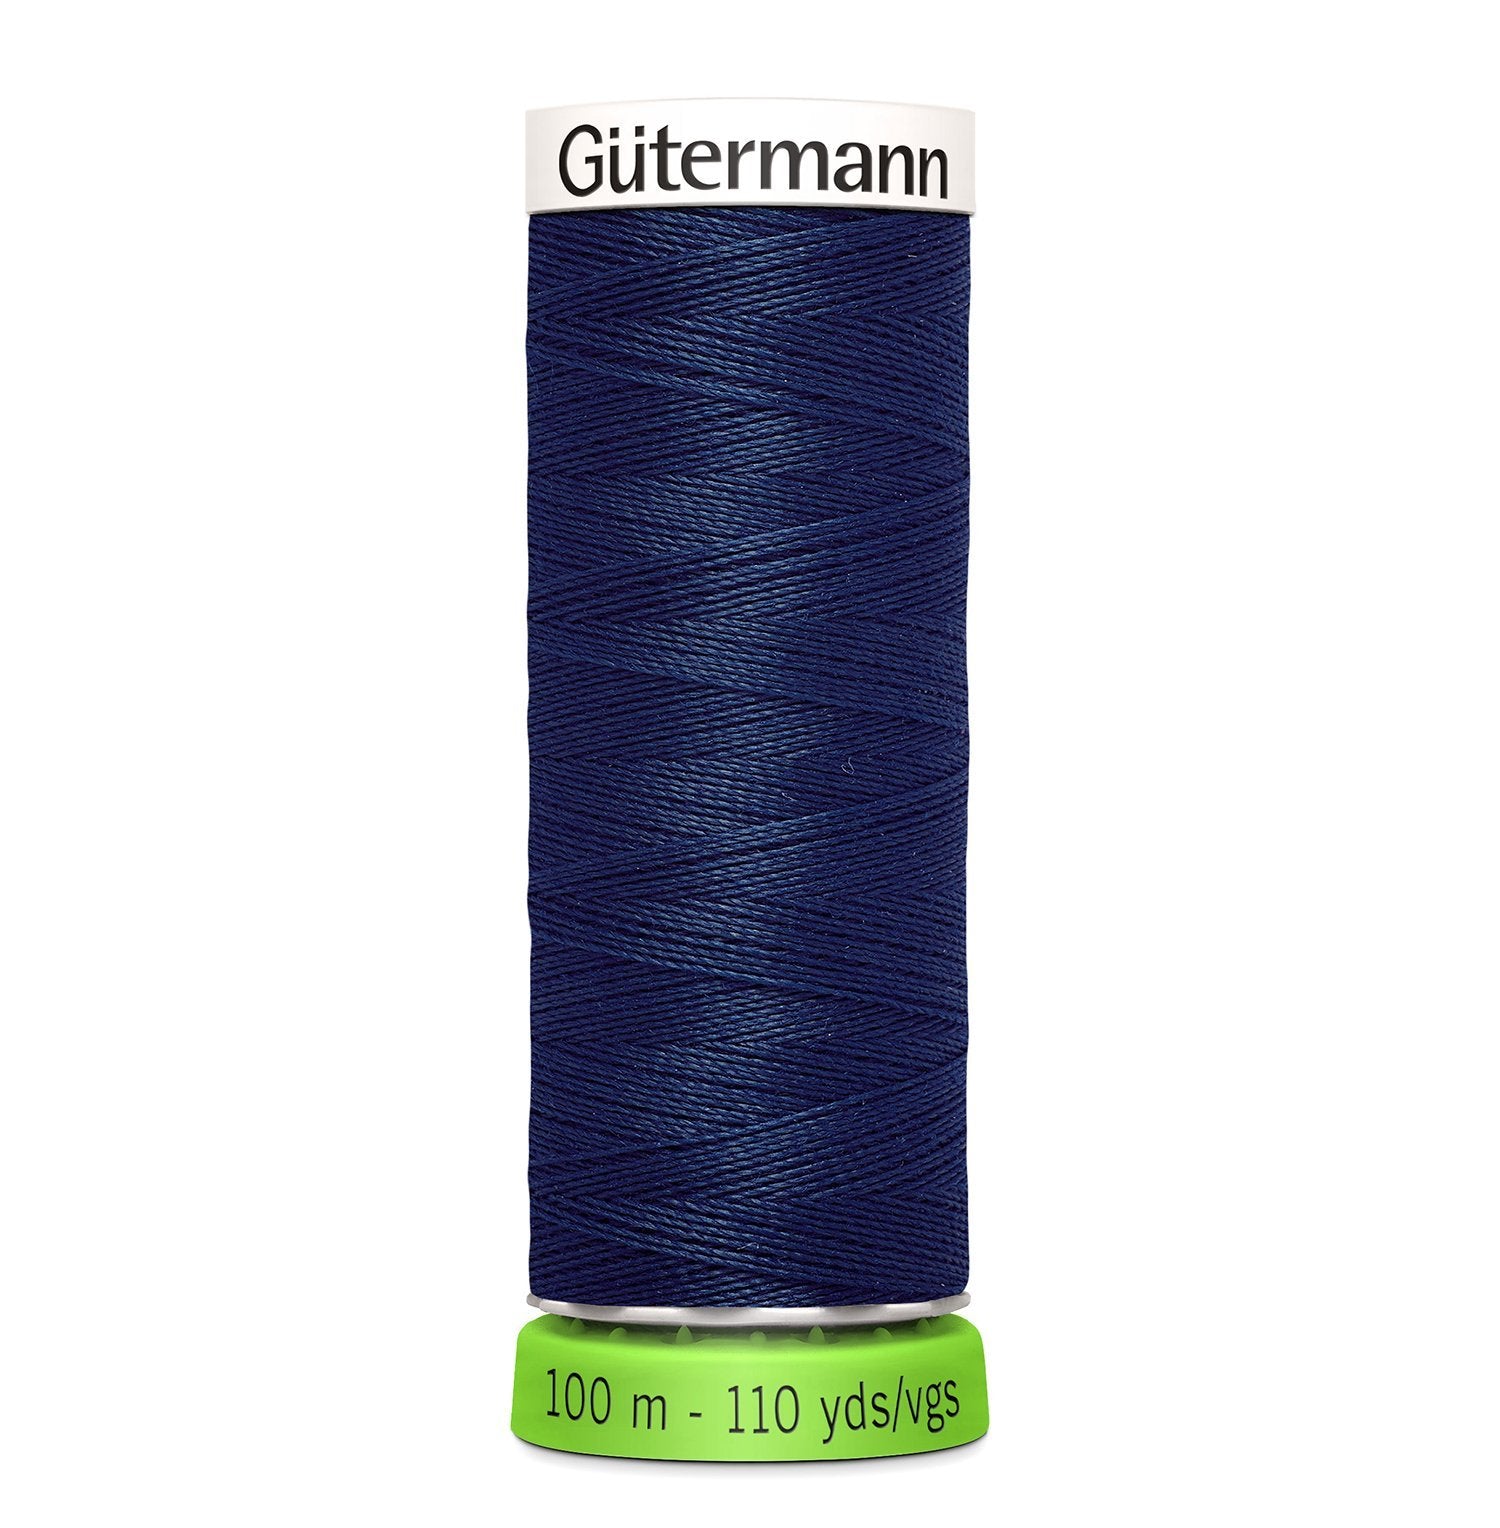 Gutermann Recycled Thread 100m, Colour 11 from Jaycotts Sewing Supplies